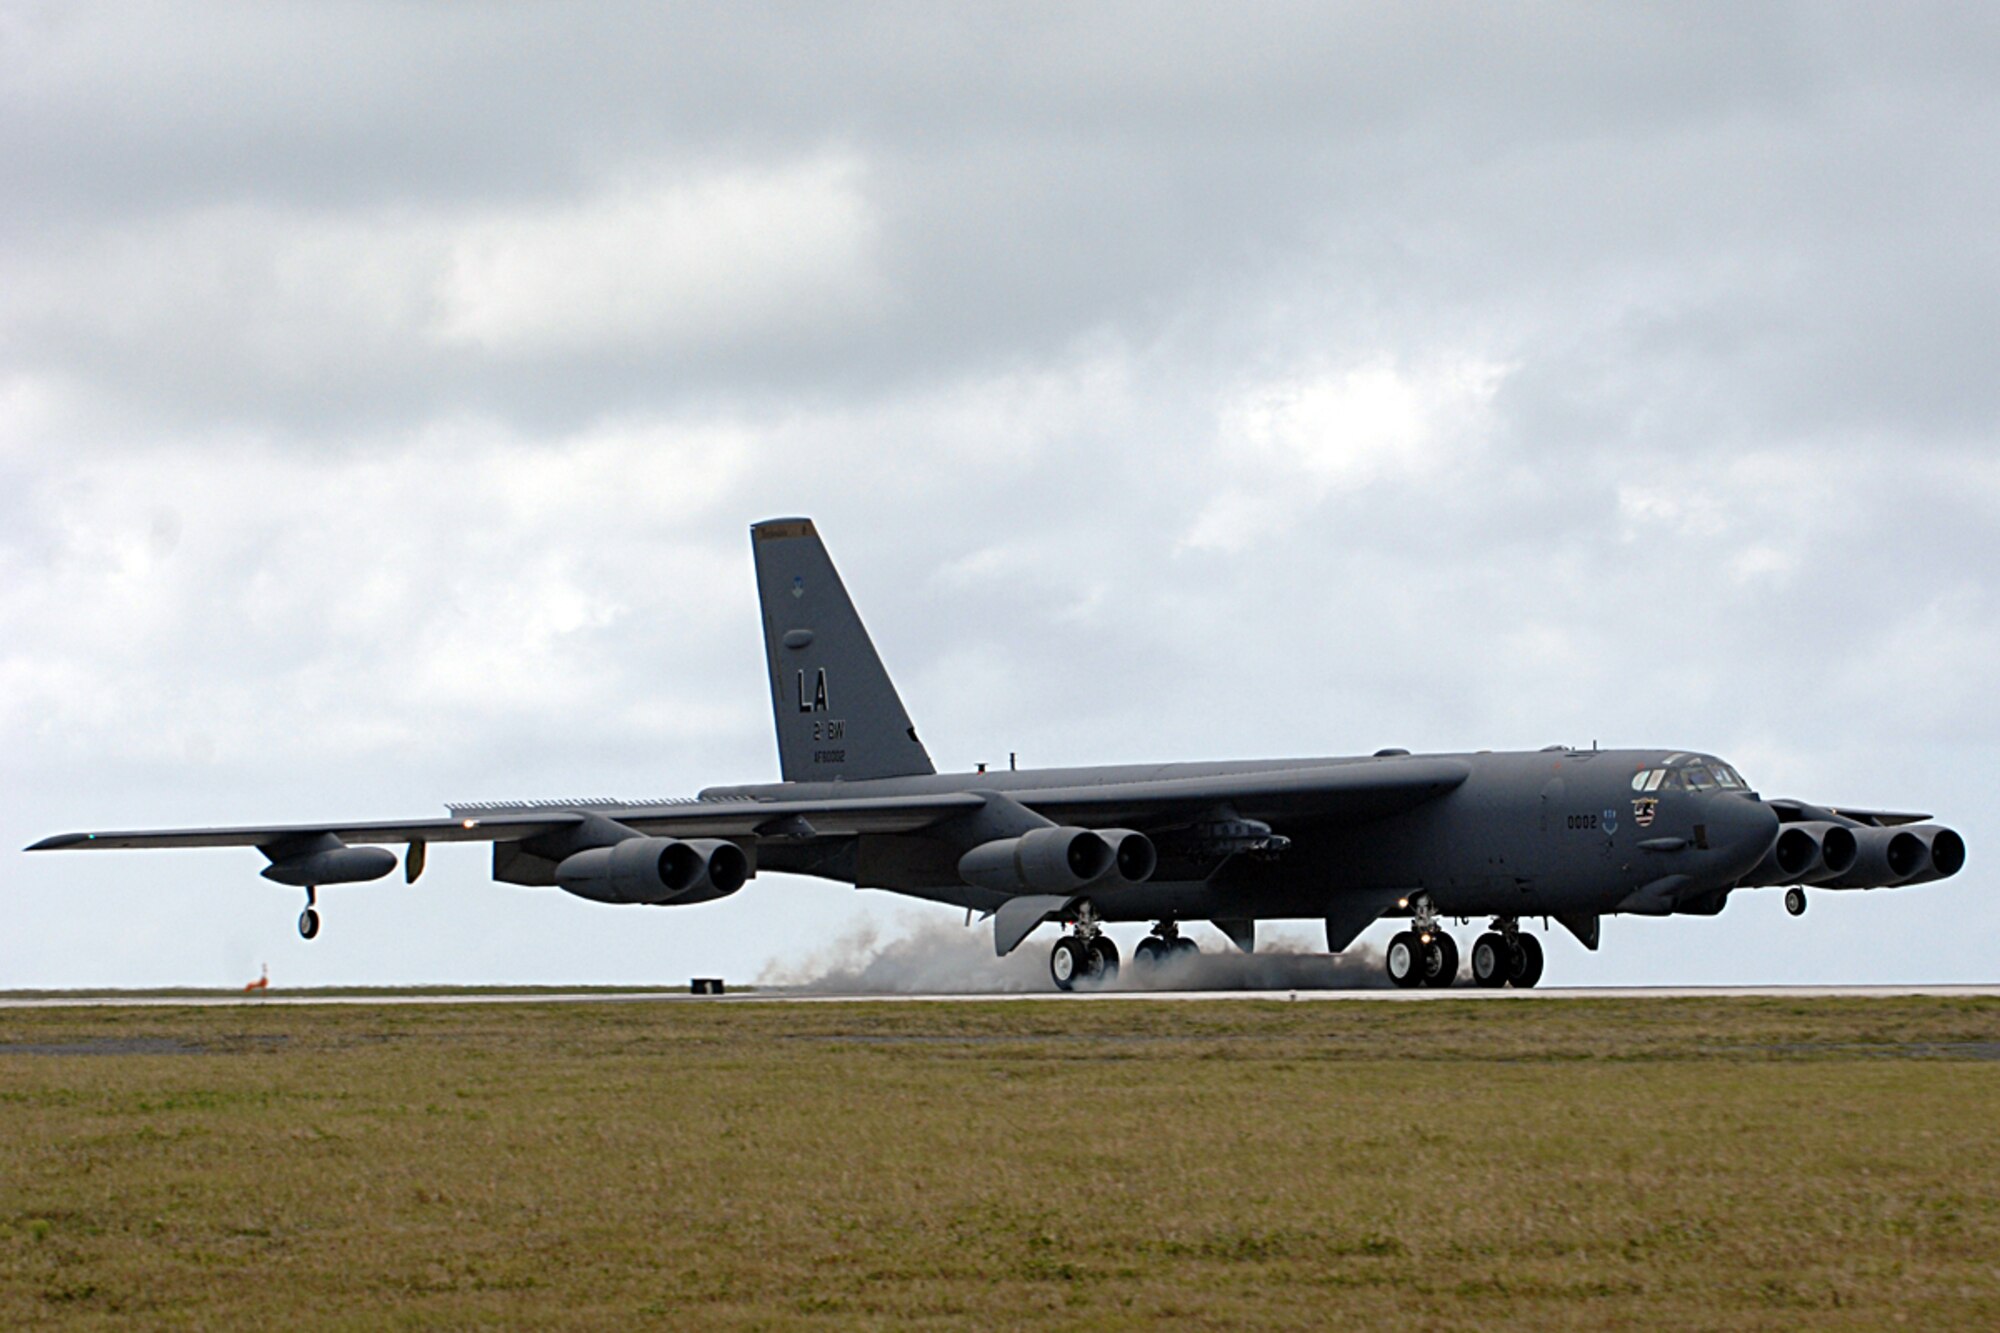 Andersen AFB, Guam -- A B-52 Stratofortress bomber  from the 96th Expeditionary Bomb Squadron lands on Andersen AFB. The rotating bomber units promote security and stability in the region as well as provide unique aircrew training opportunities. The 96th EBS is deployed here from Barksdale AFB, La.
(U.S. Air Force Photo By Staff Sgt. Vanessa Valentine) 